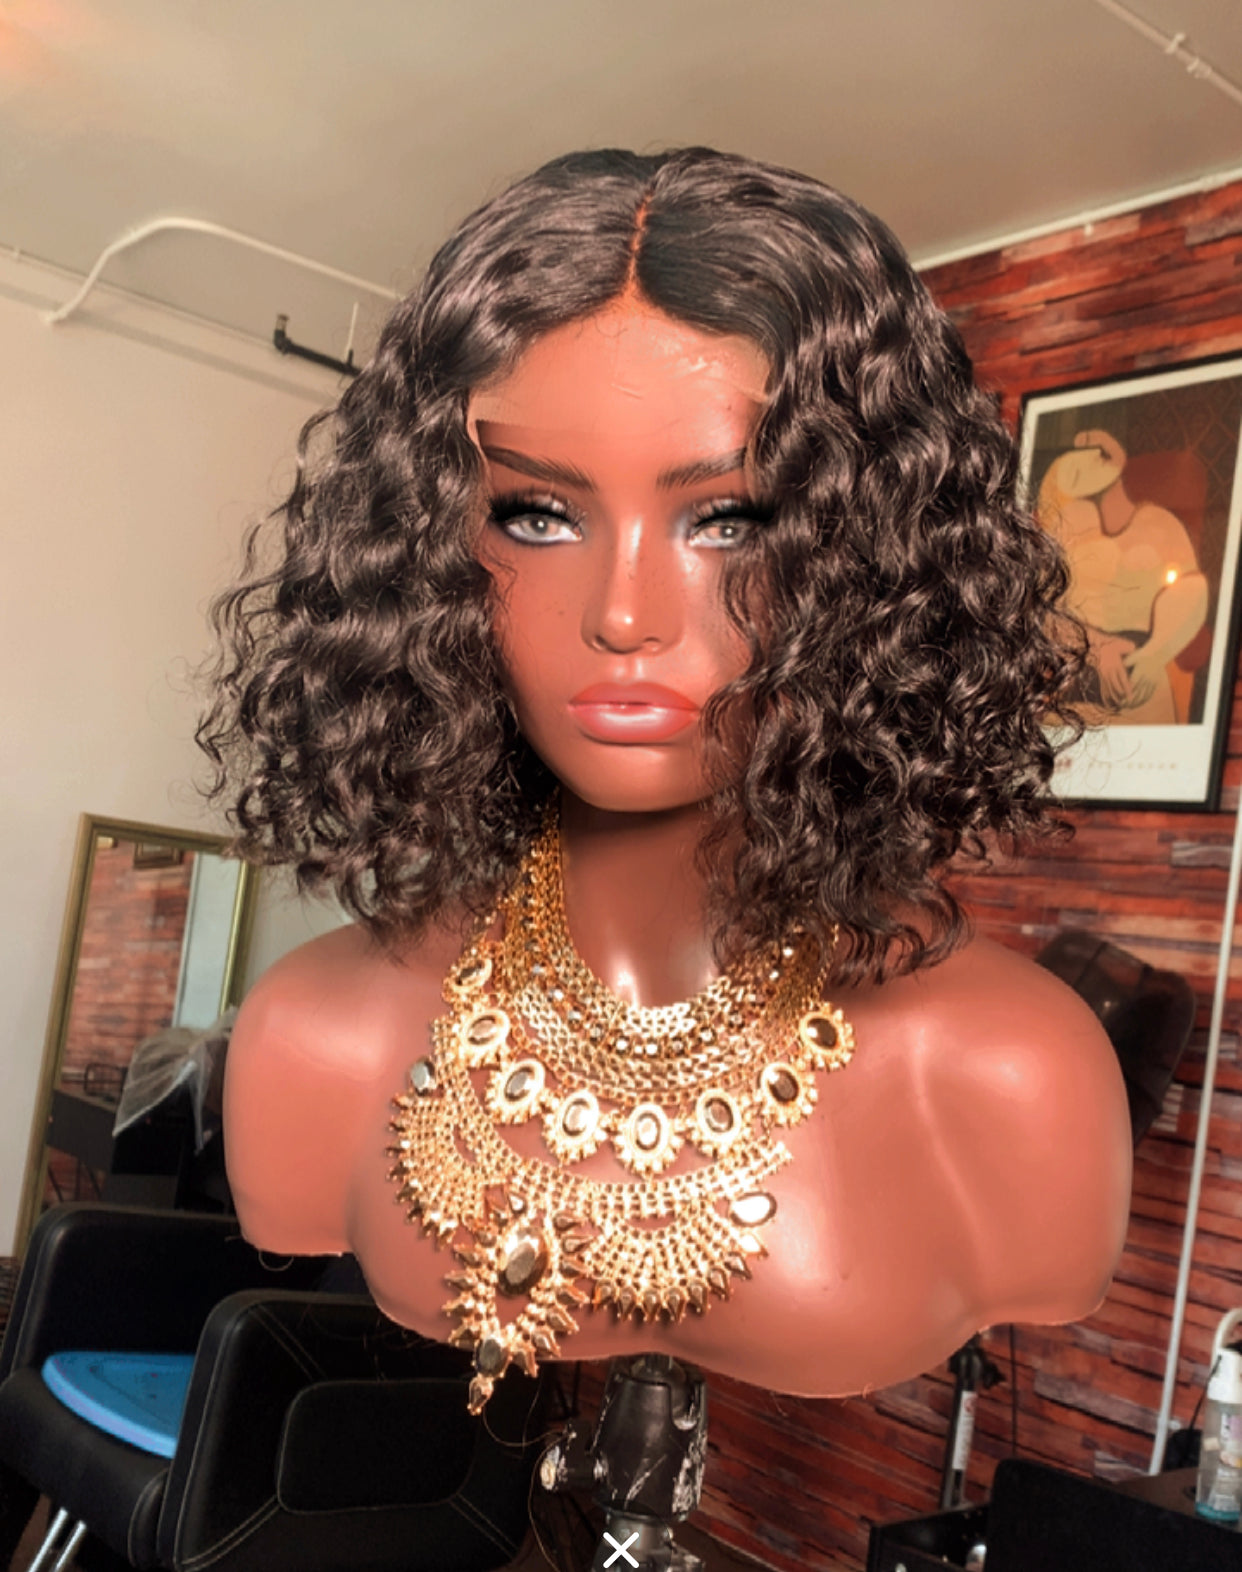 Cambodian Deep Wave Frontal Bob Wig - The Frontal Queen